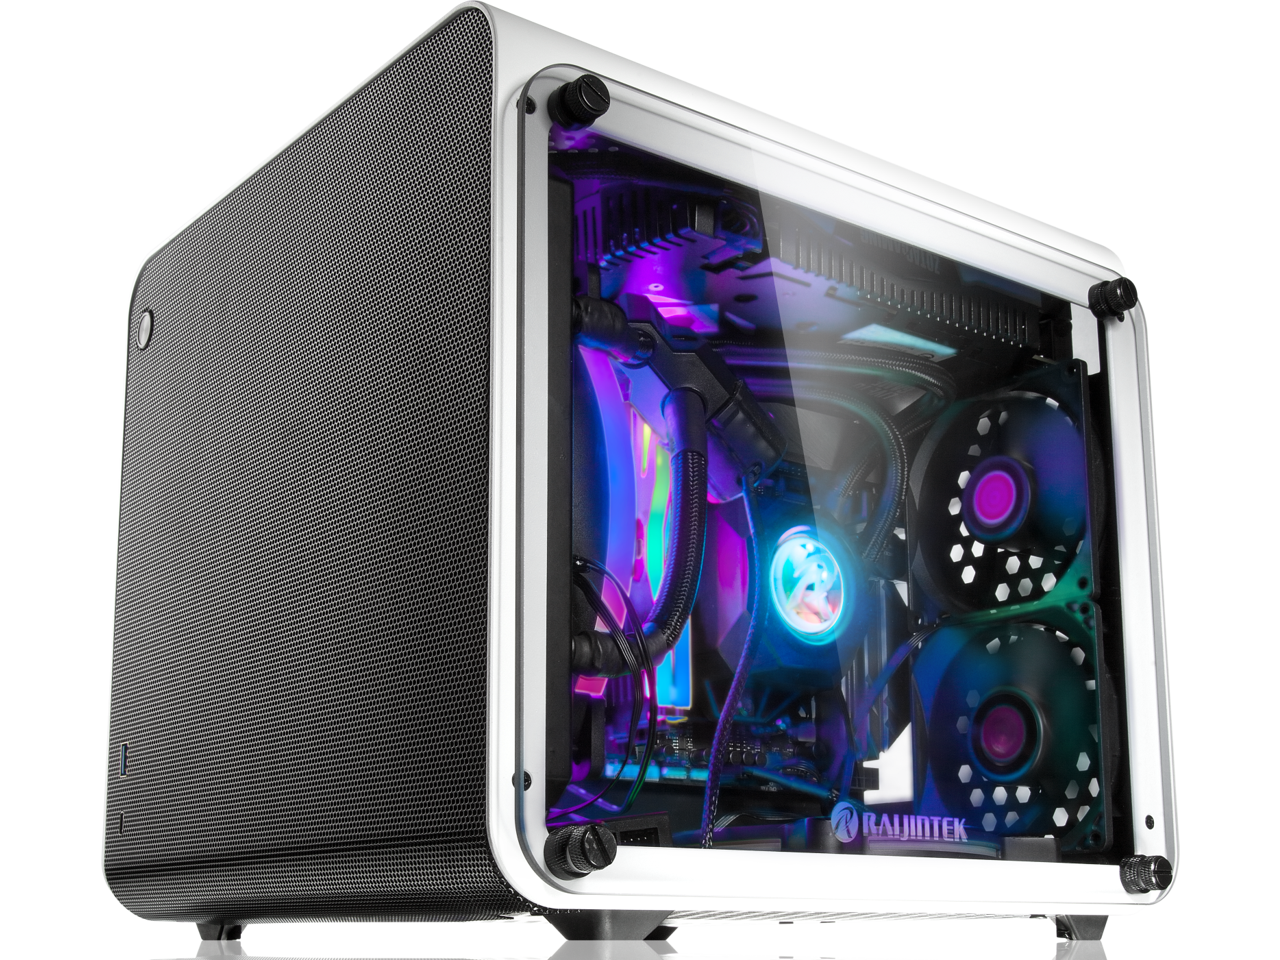 METIS EVO WHITE ALS, an Alu. ITX case with solid panel, is designed to fulfill the smallest case built with ultra high air flow to solve all thermal issue of SFF chassis, 200mm fan option at front.